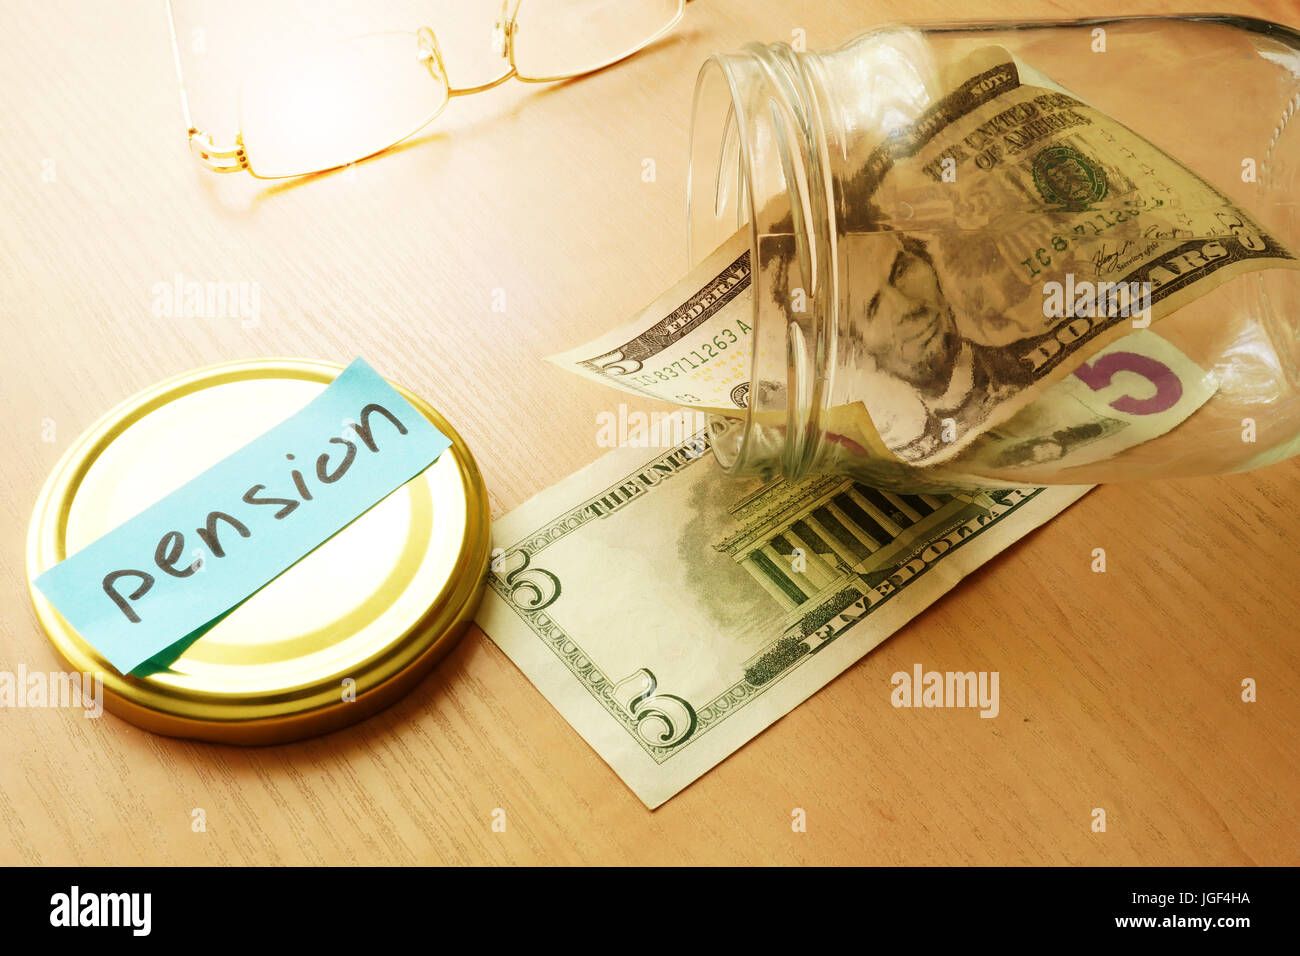 Almost empty jar with label pension. Retirement savings problems. Stock Photo